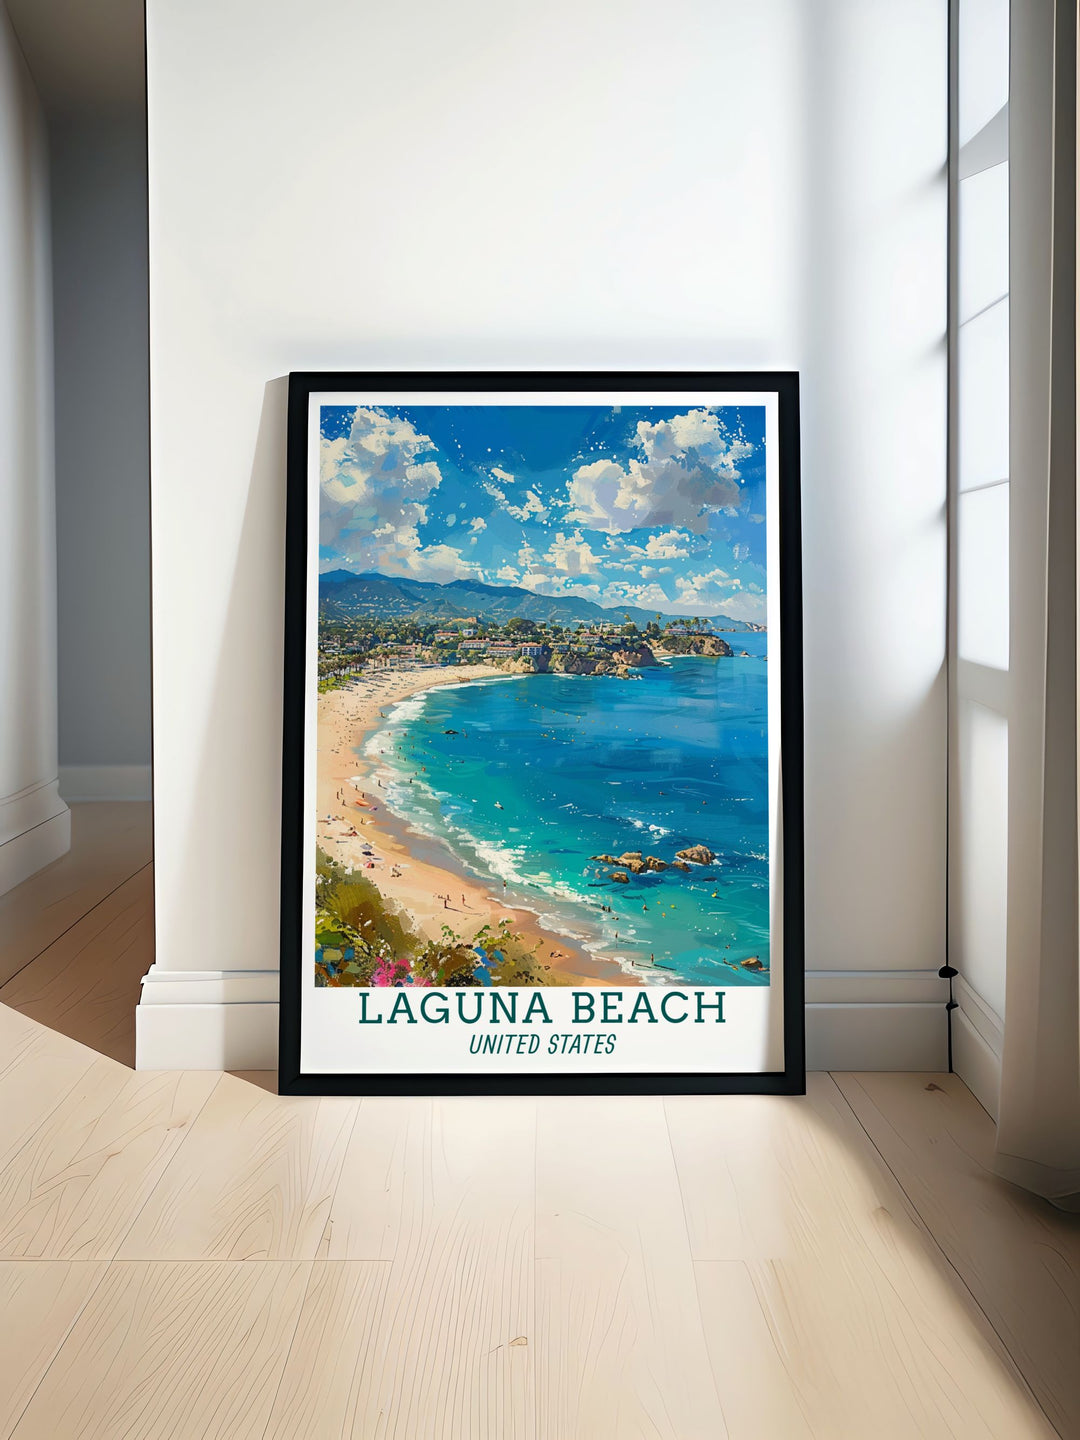 Laguna Beach Print featuring Main Beach showcases vibrant colors and intricate details perfect for adding a touch of coastal charm to your home decor ideal for living room or bedroom wall art.